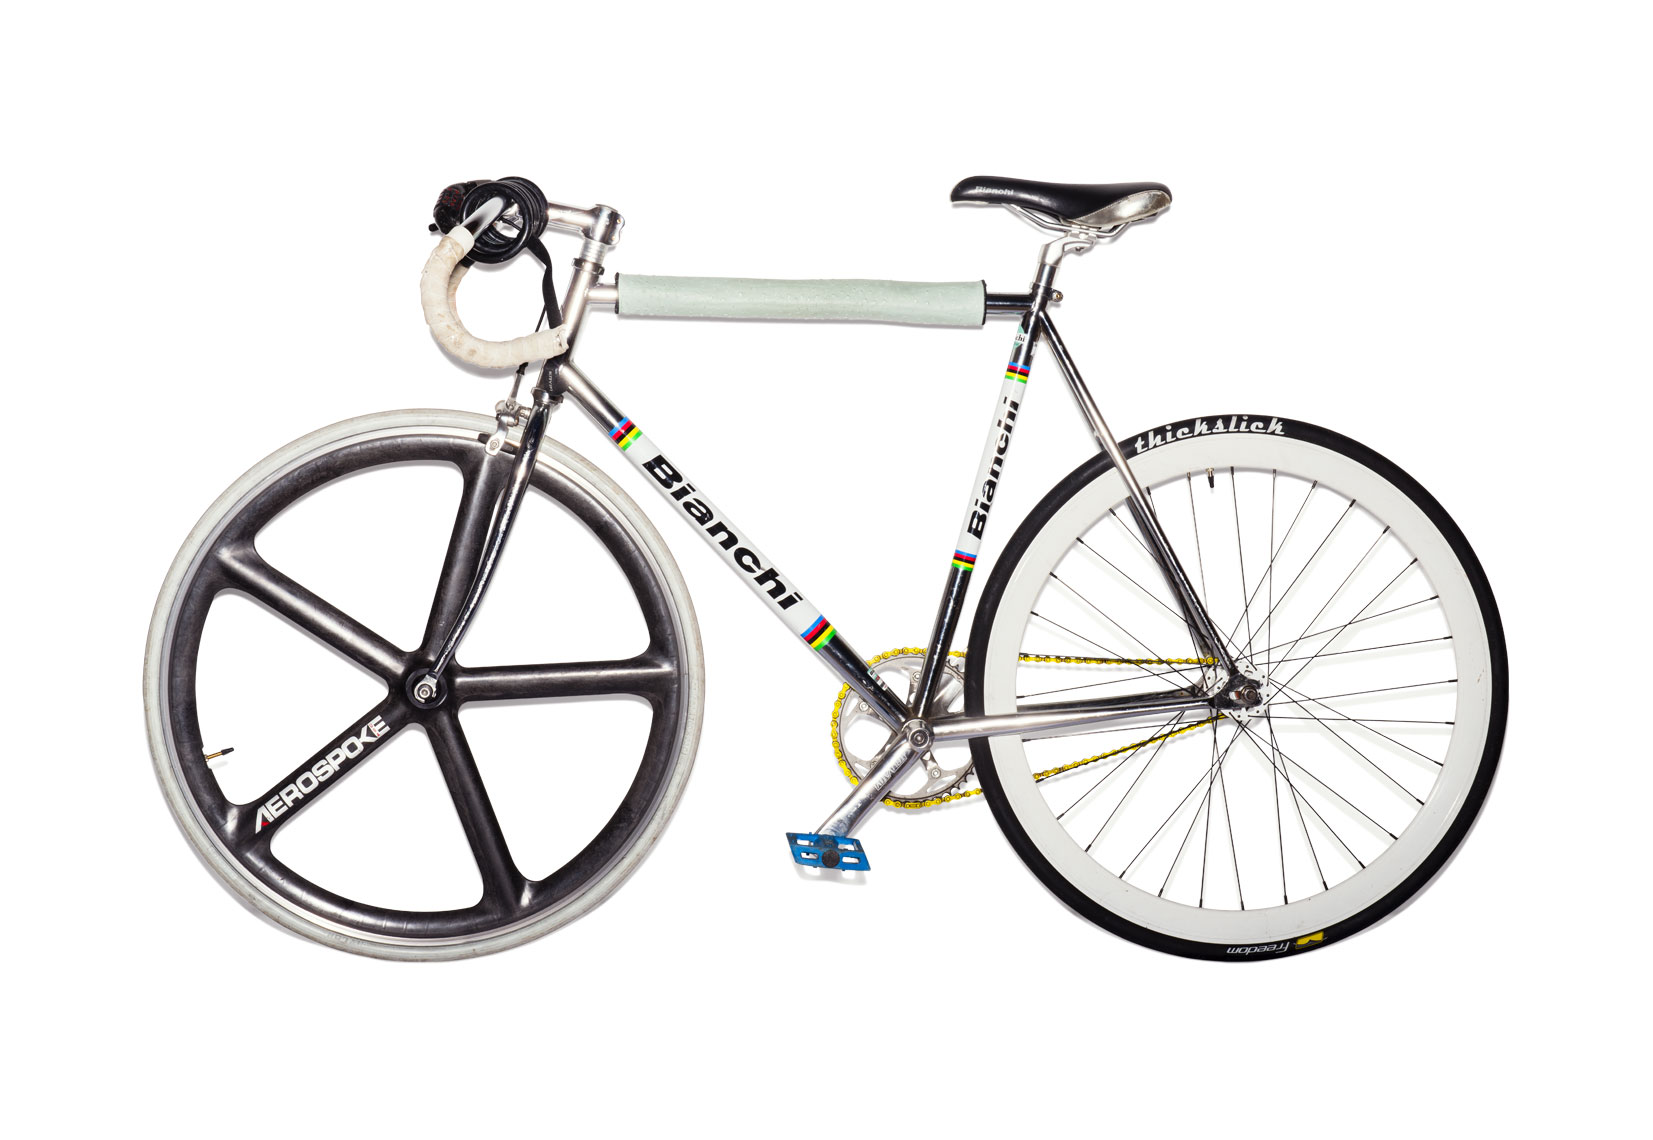 fixed gear bicycle for print catalog and social media